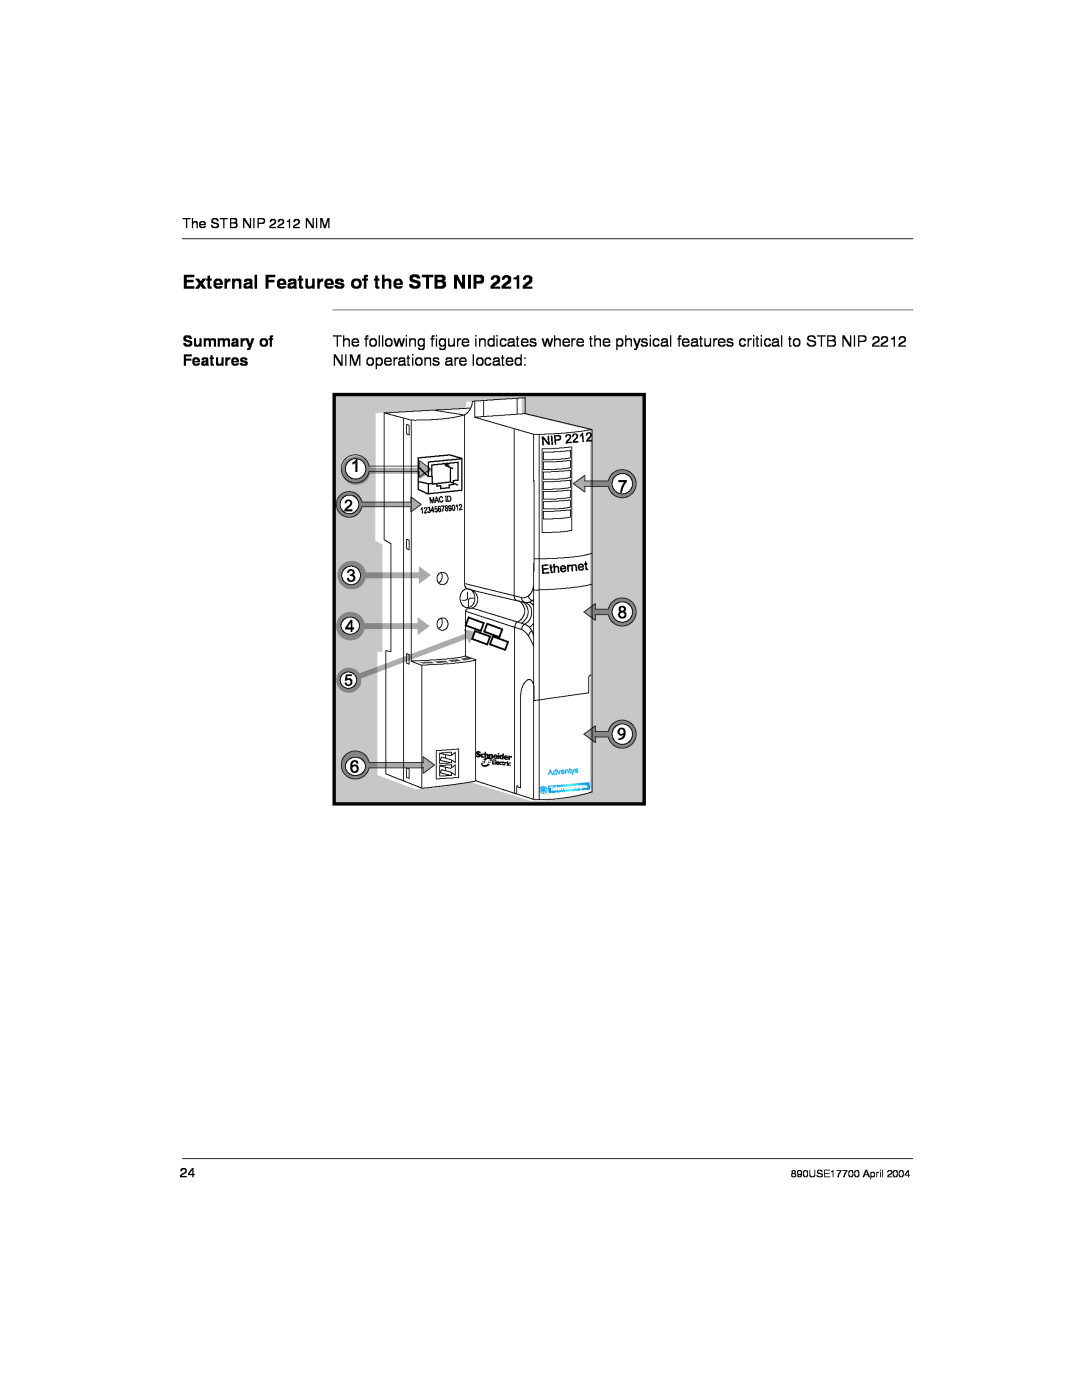 Schneider Electric manual External Features of the STB NIP, Summary of, NIM operations are located, 890USE17700 April 